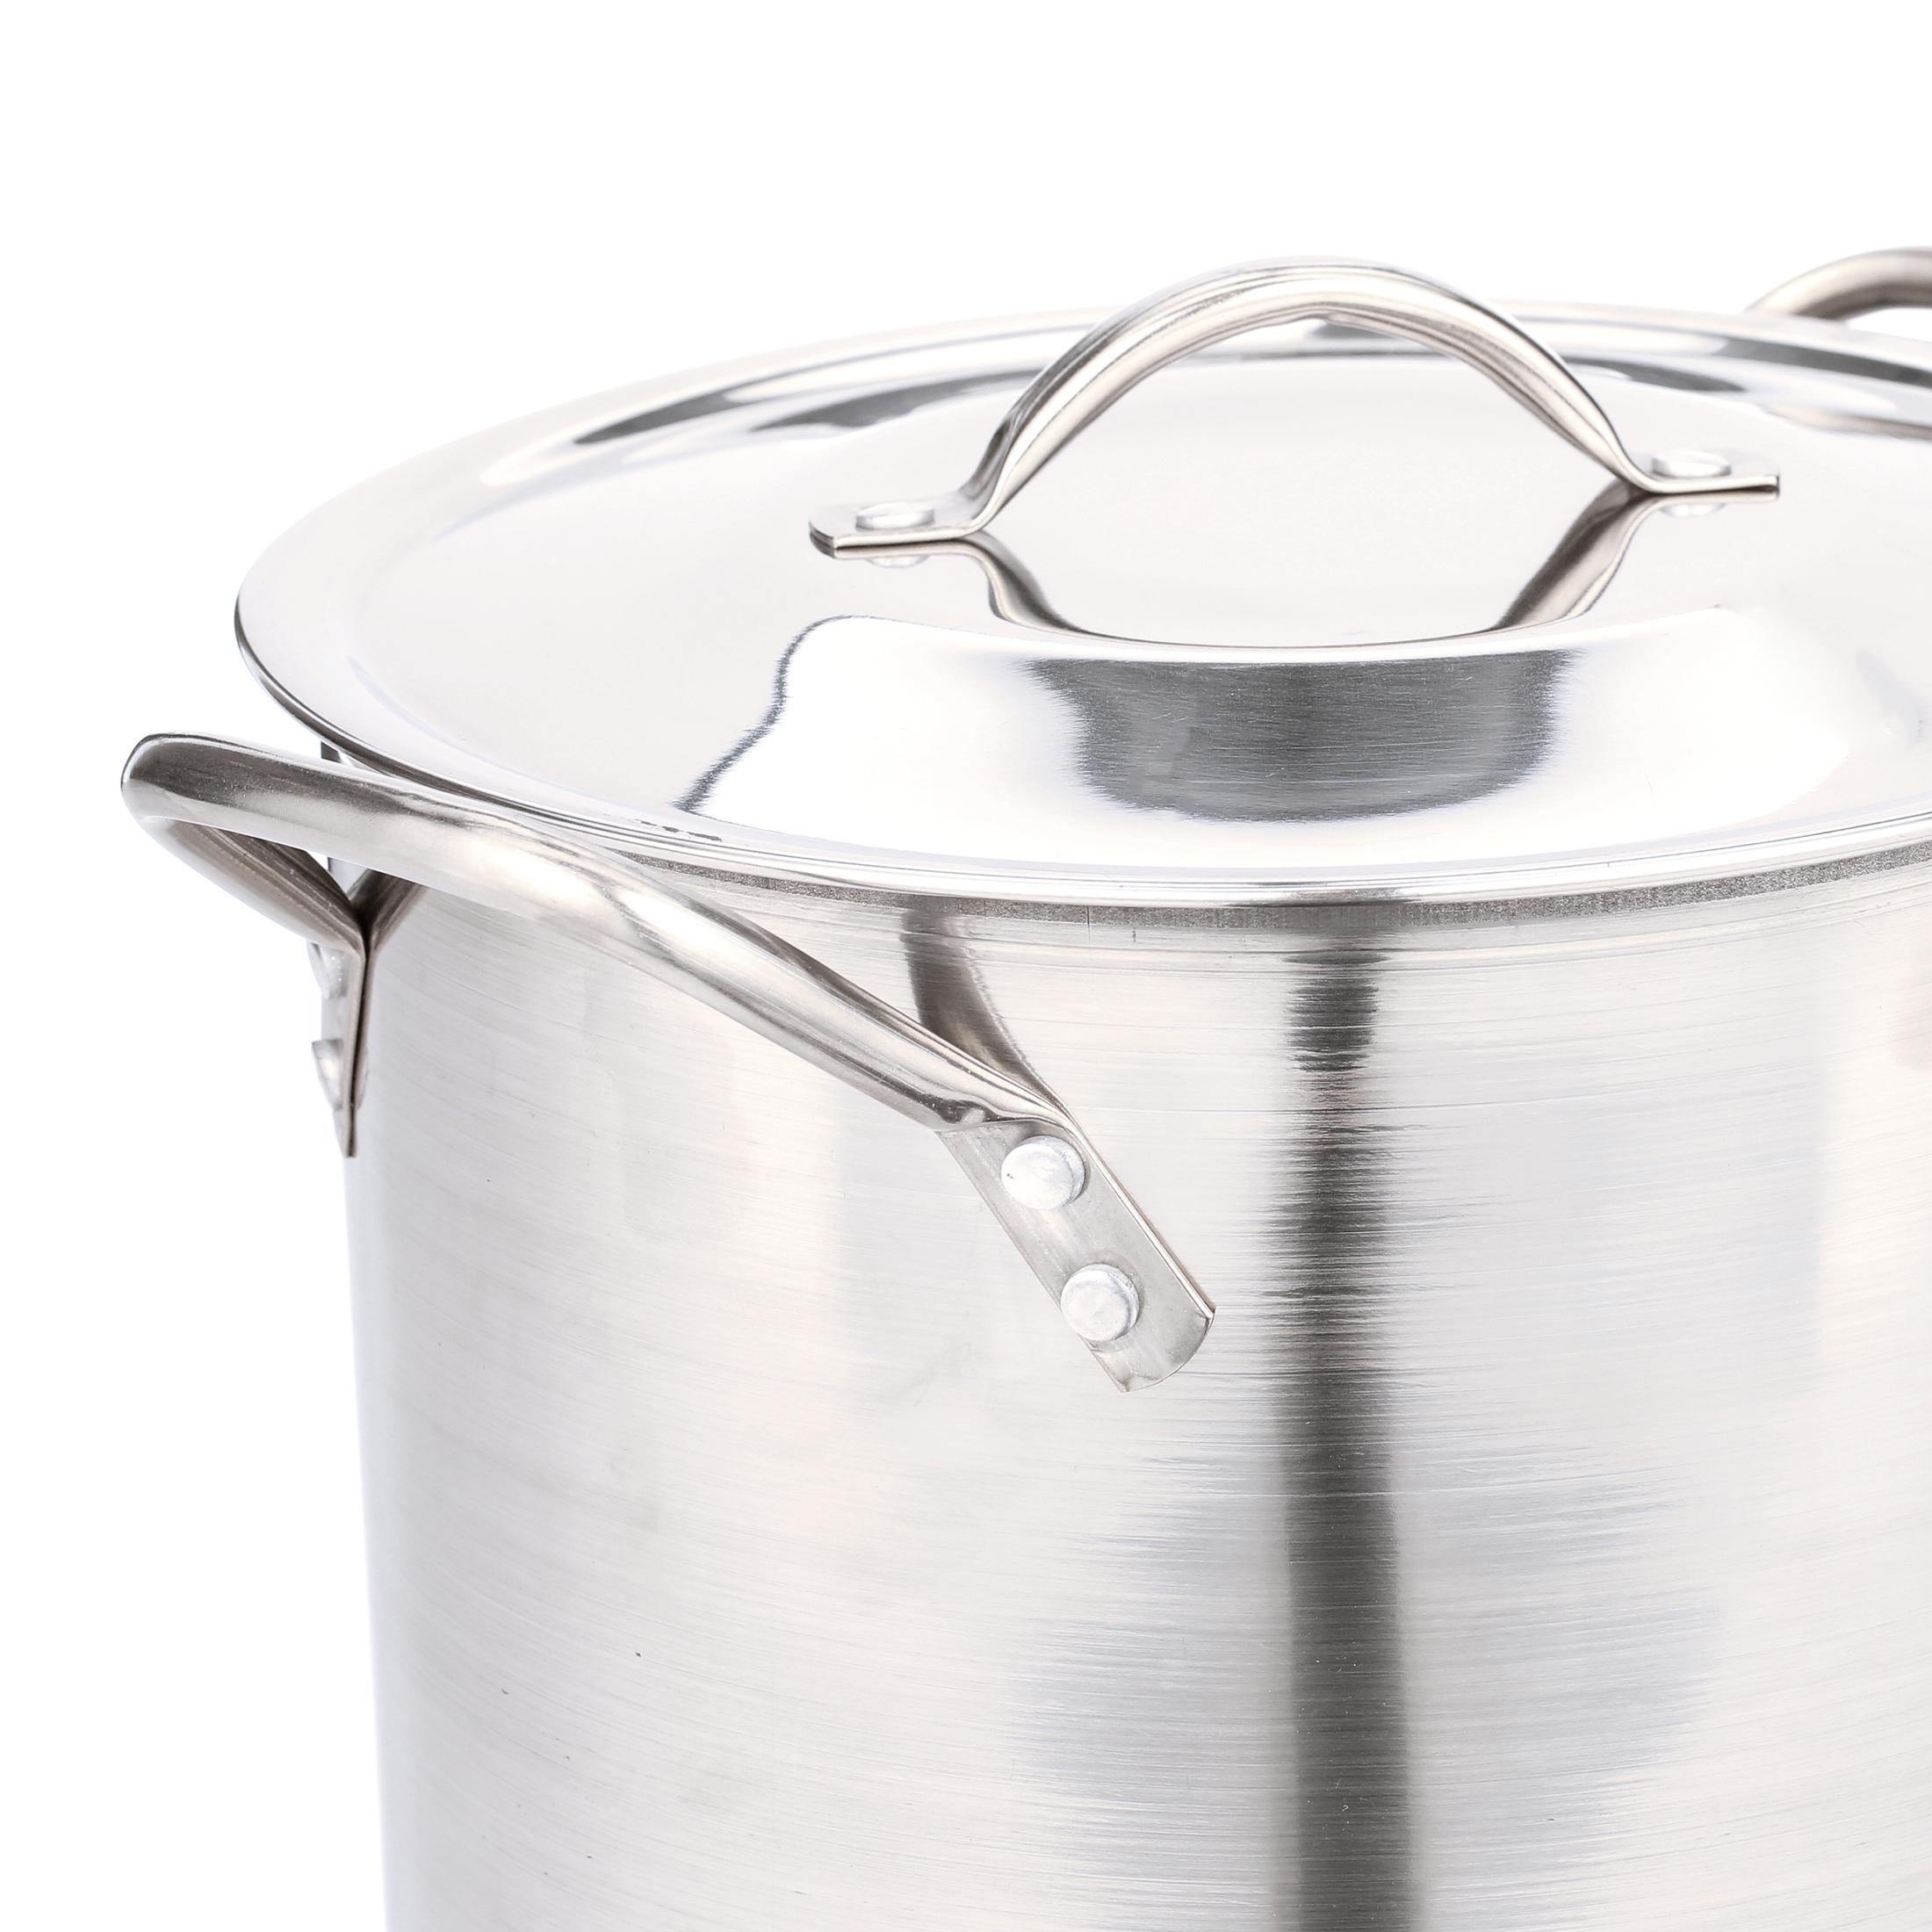 Mainstays 8-Qt Stainless Steel Stock Pot with Metal Lid - image 3 of 6